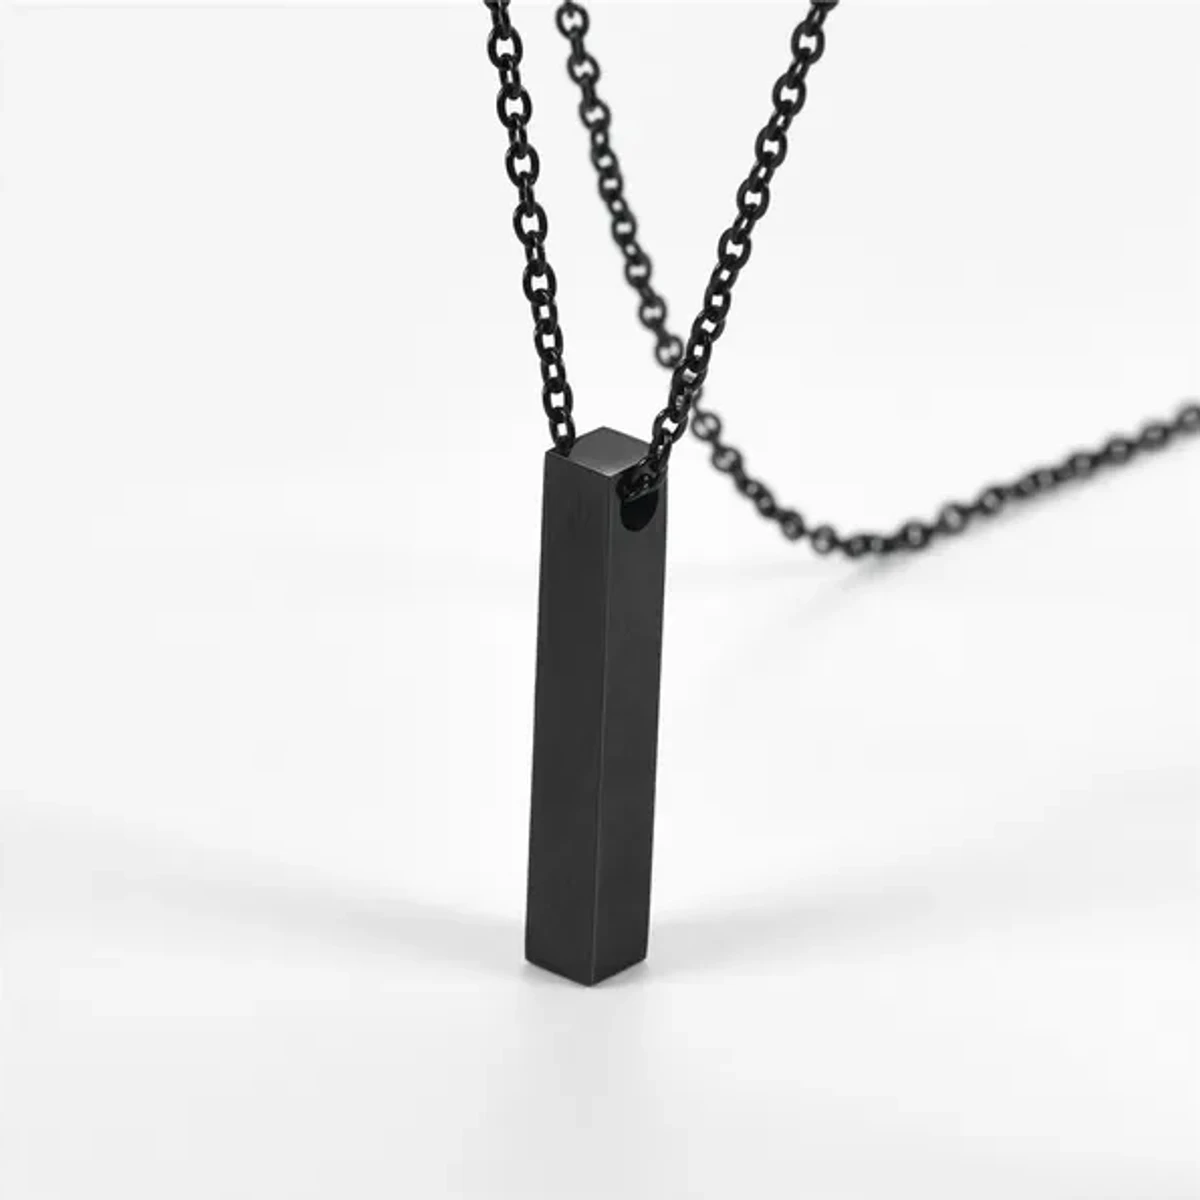 Stainless Steel Stylish New Necklaces For Men's